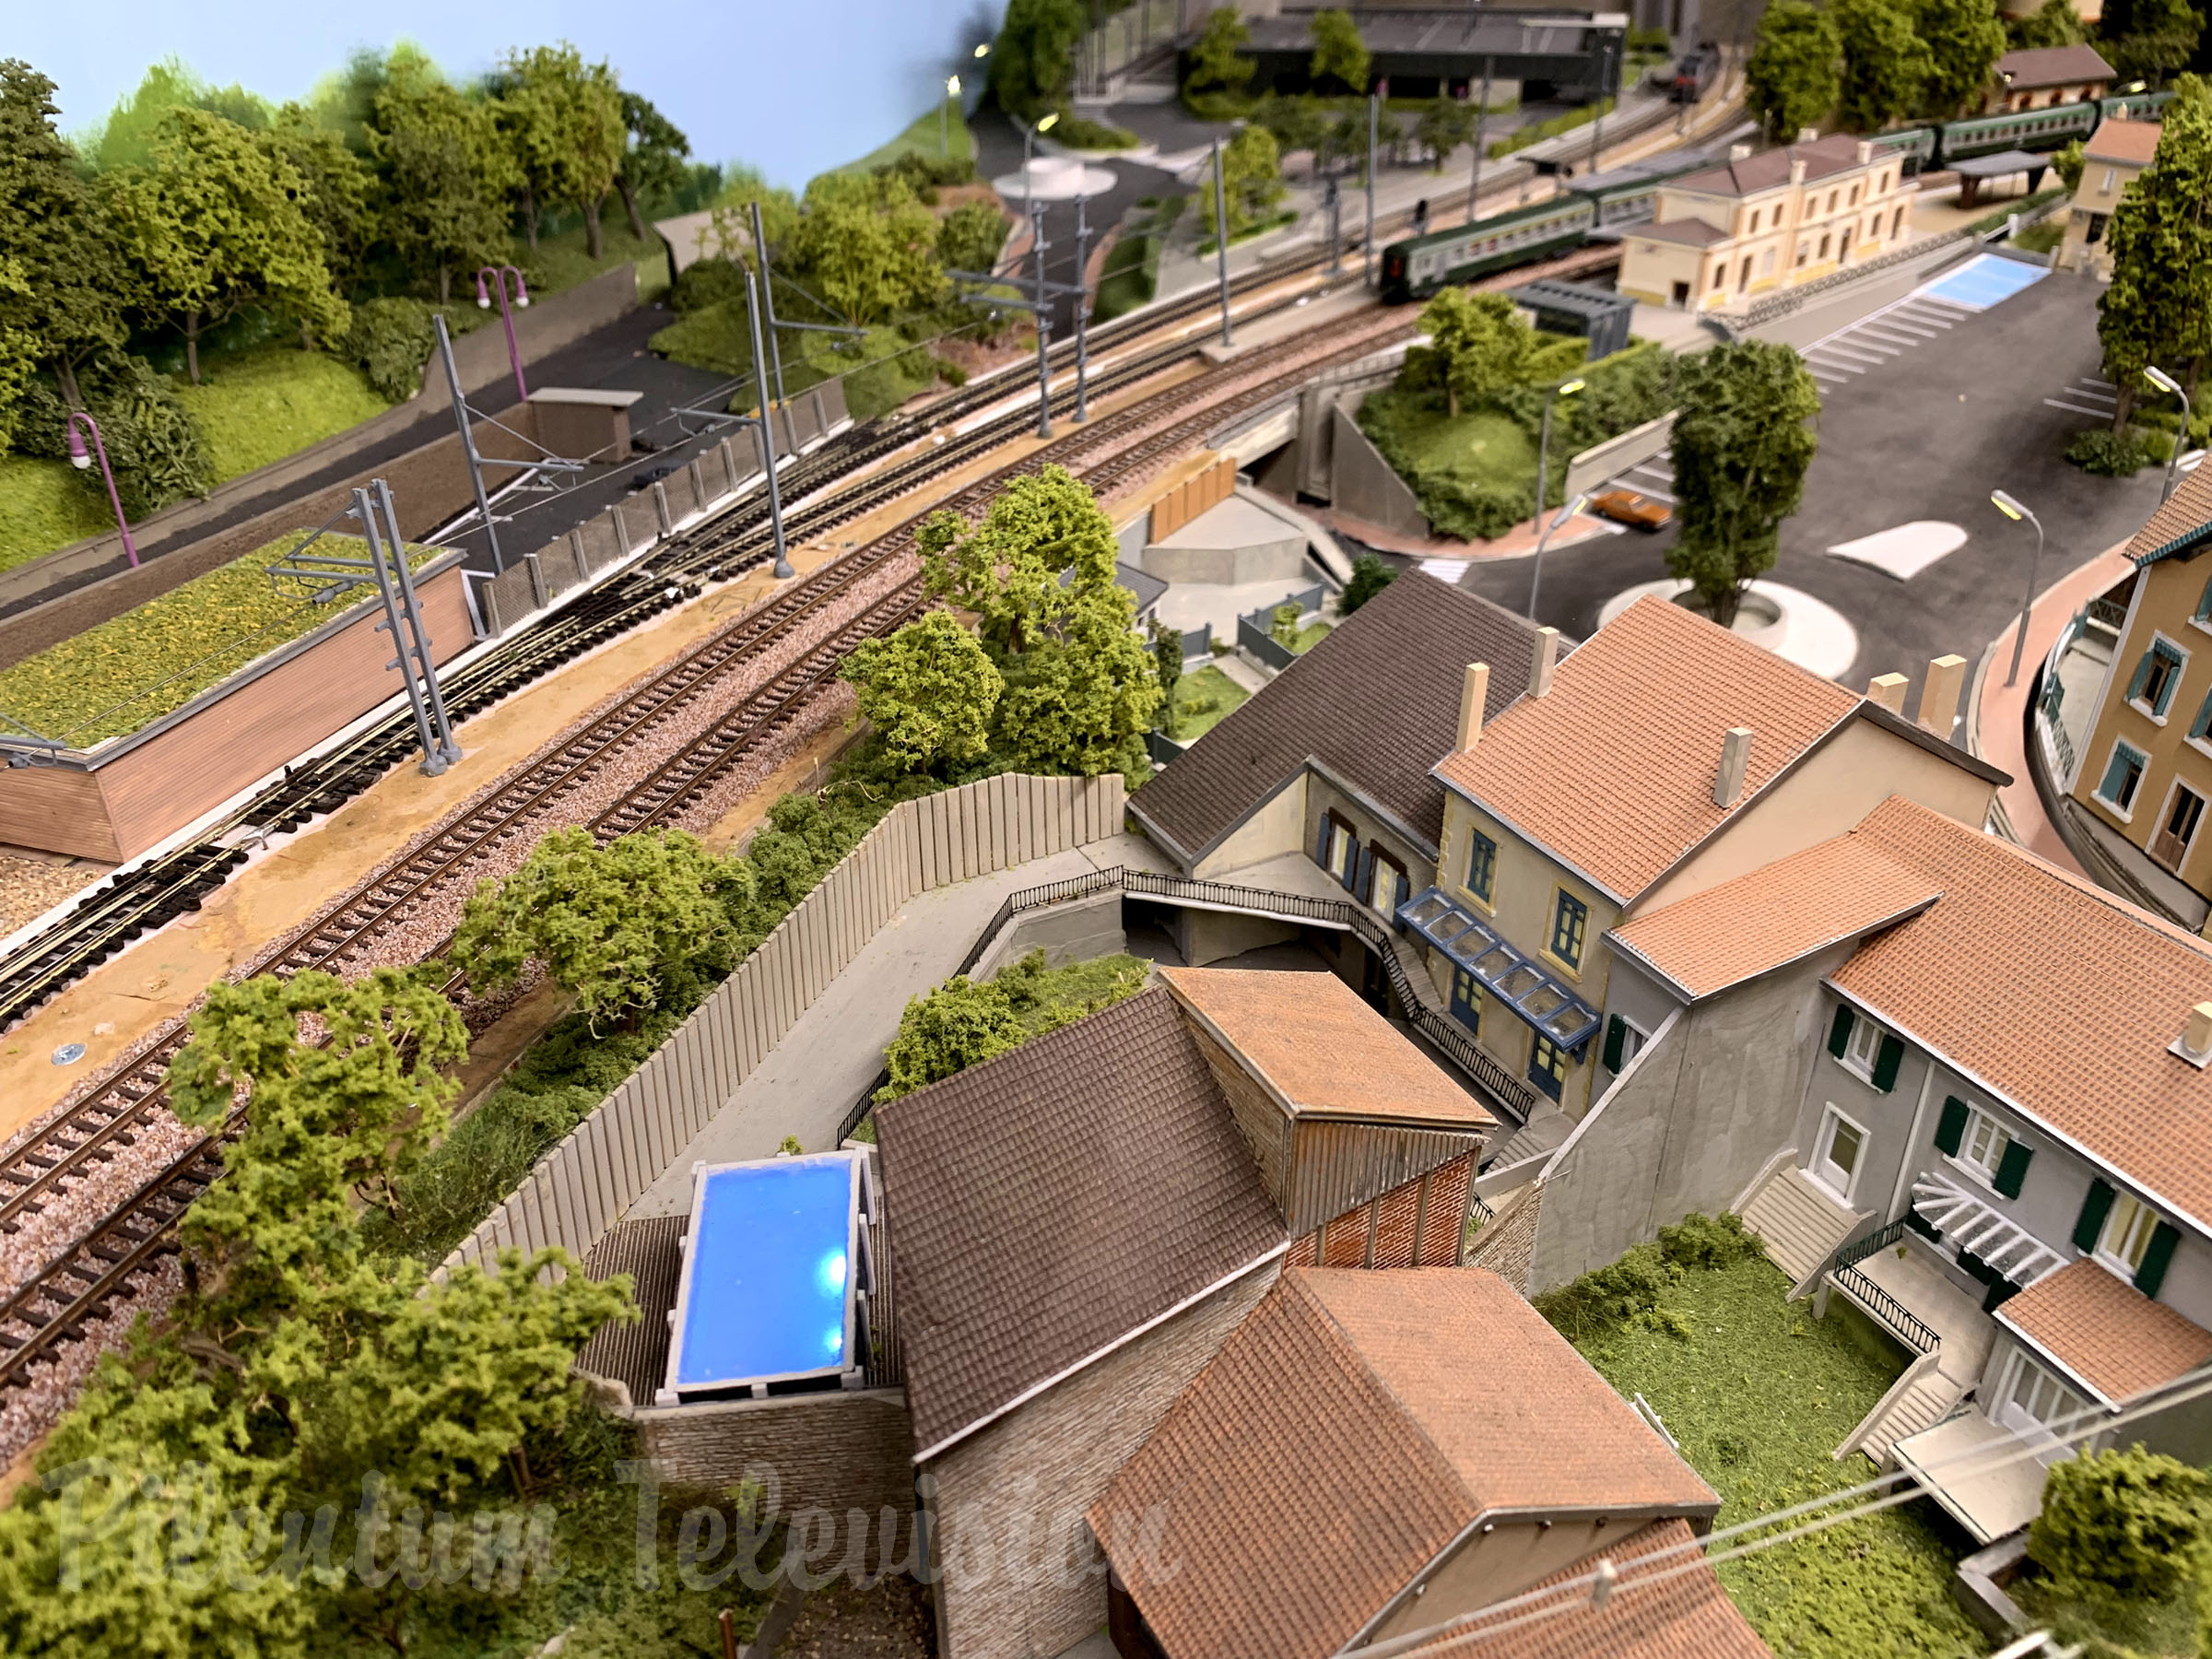 French N Scale Layout and SNCF Model Trains at the Prototype Railway Station of L’Arbresle